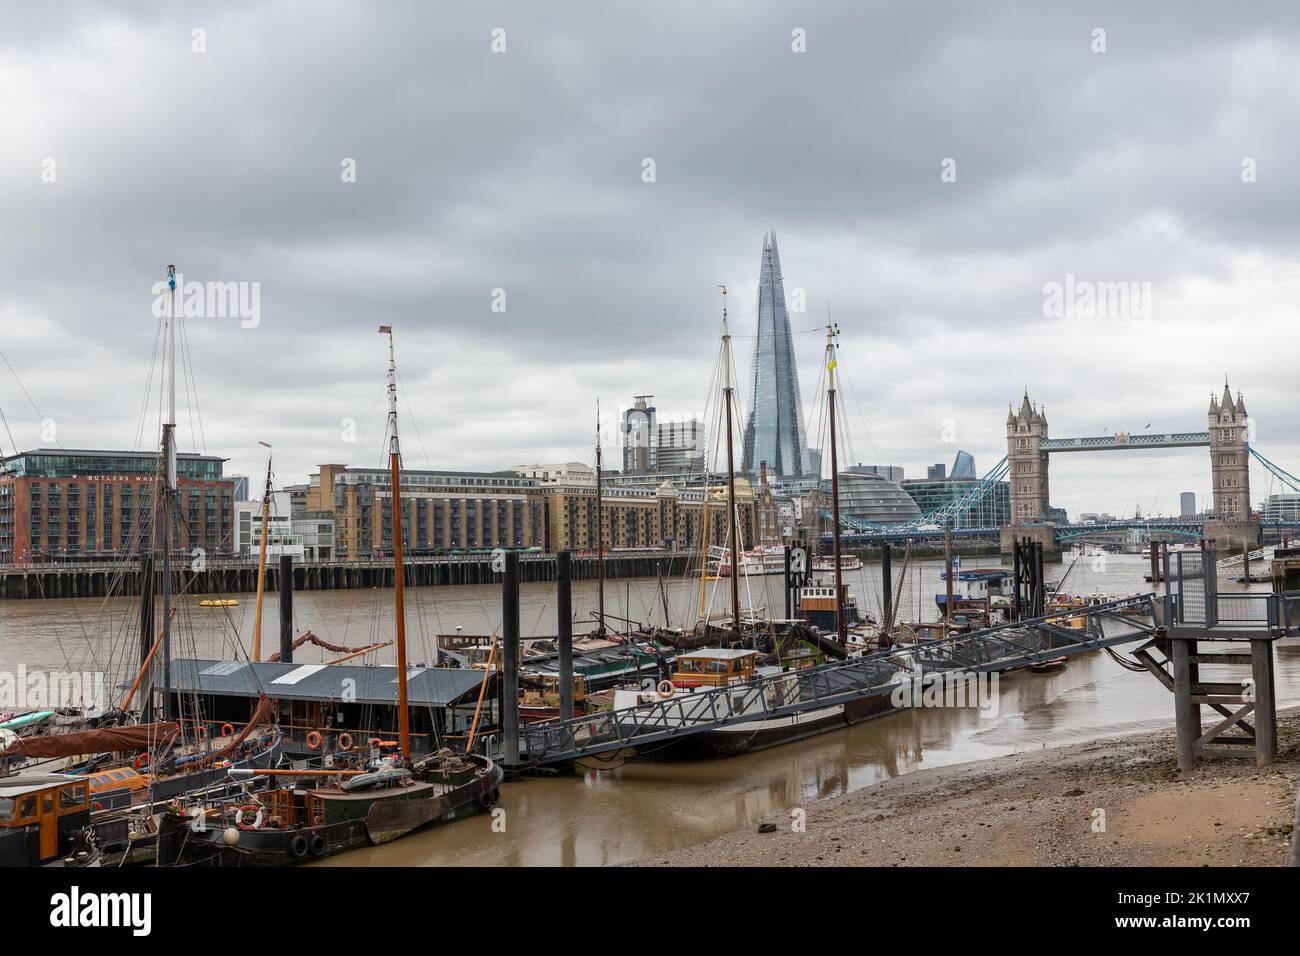 View of the River Thames in London on an Autumn day. Barges near saint katharine dock in the foreground. Stock Photo